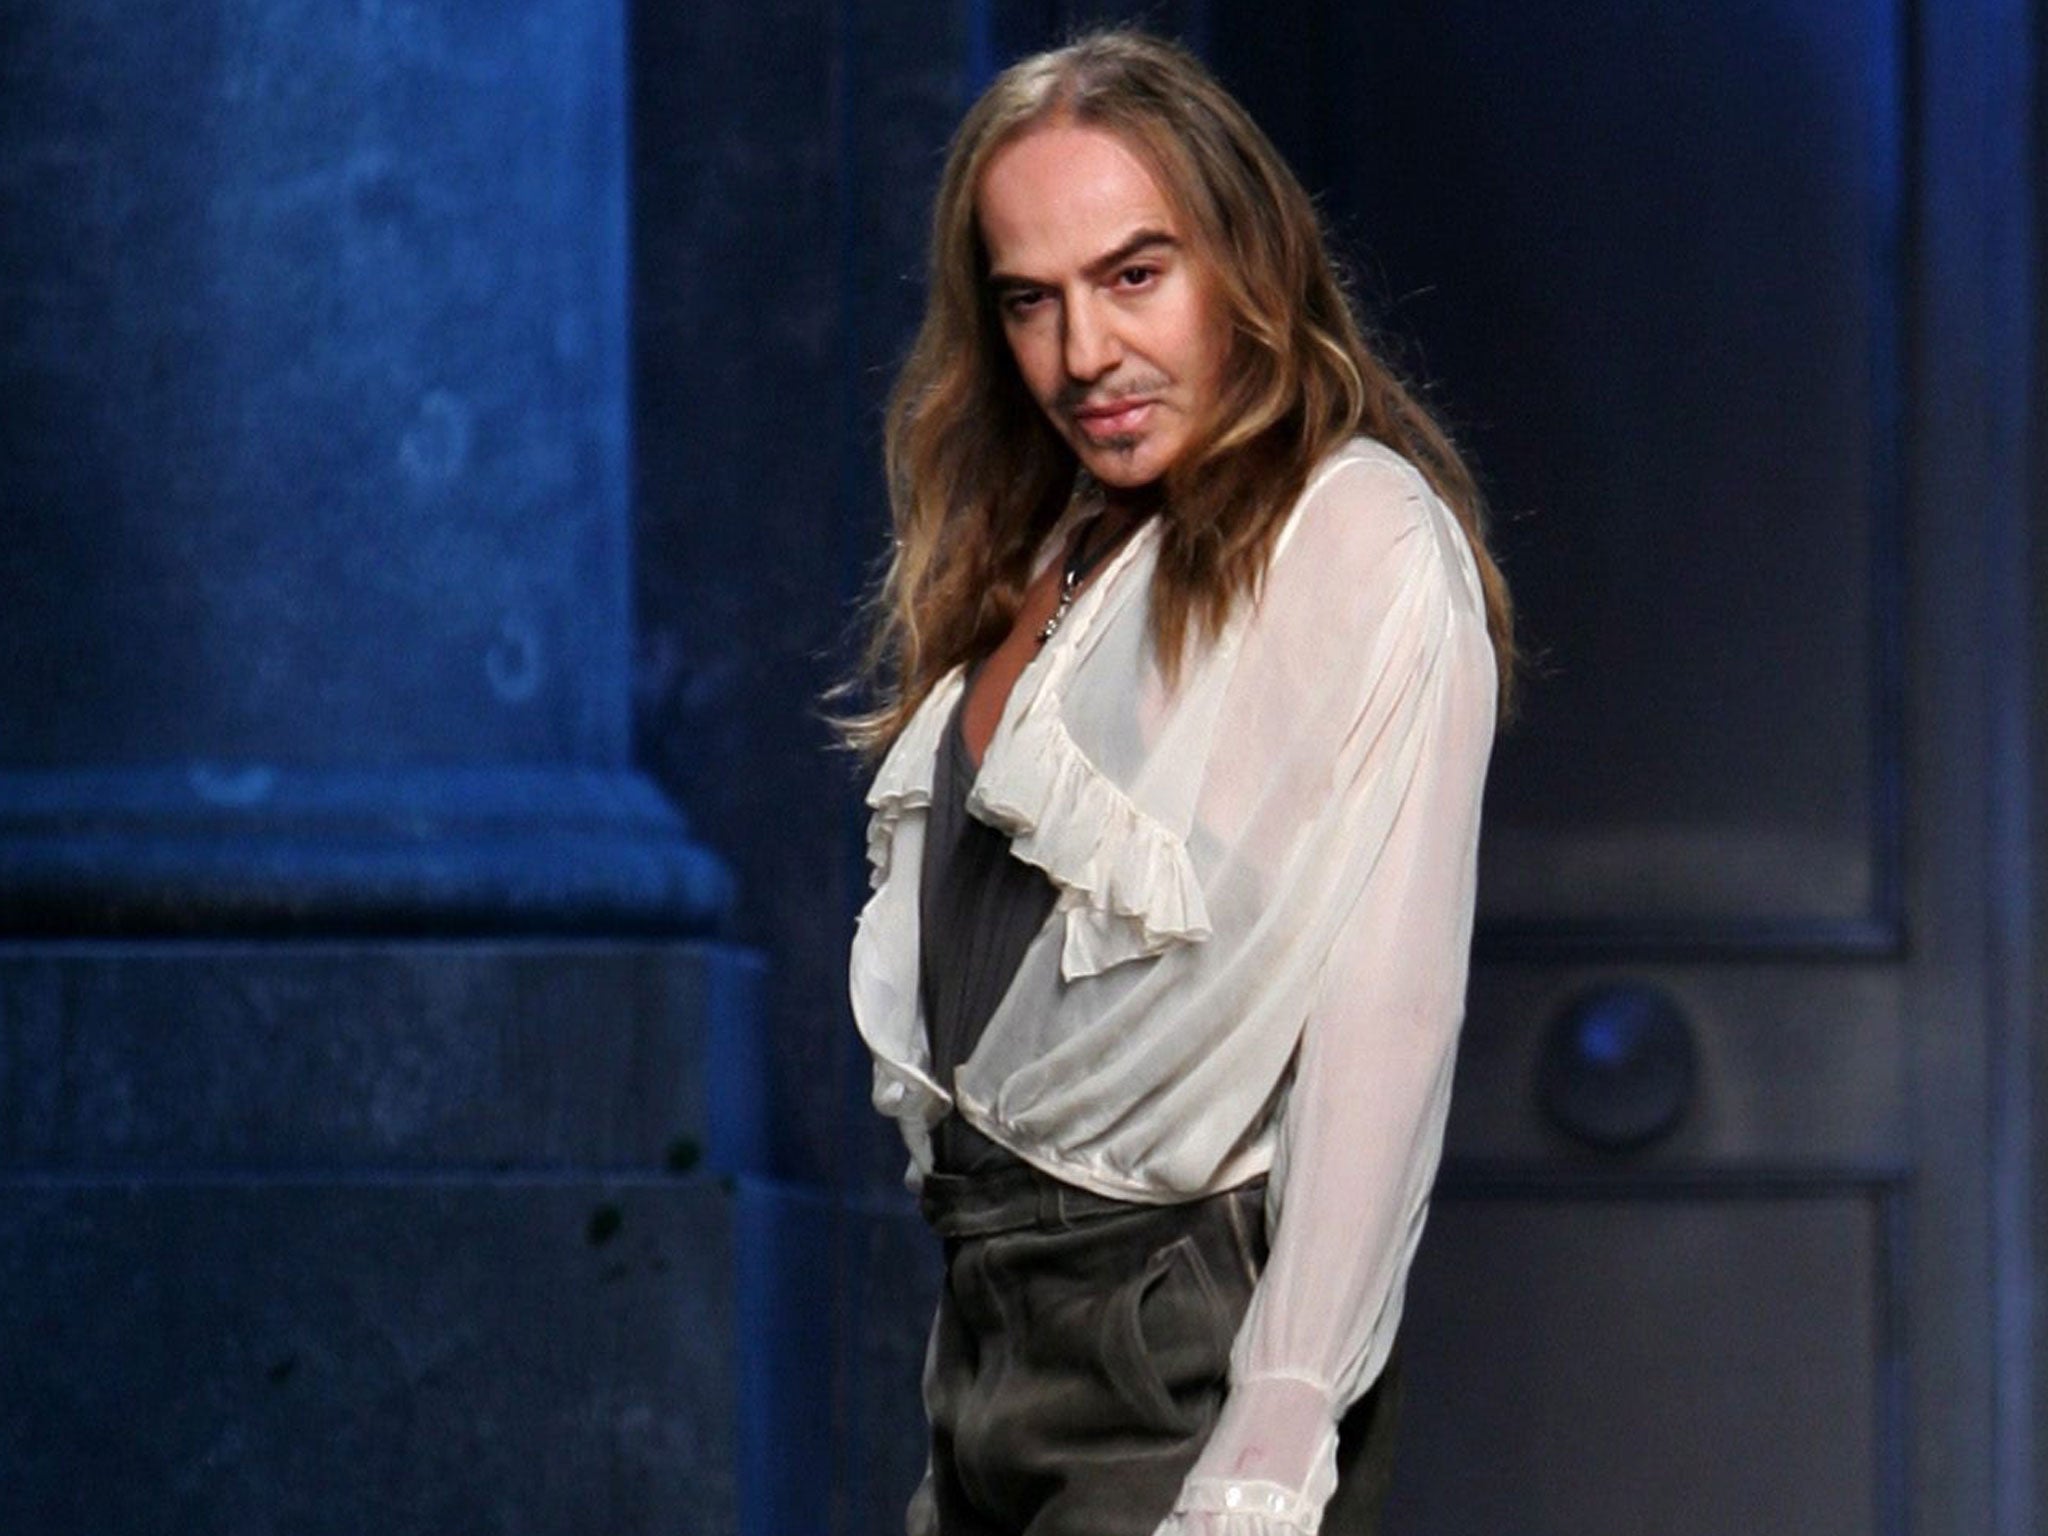 John Galliano is suing Dior for a reported £5.2m